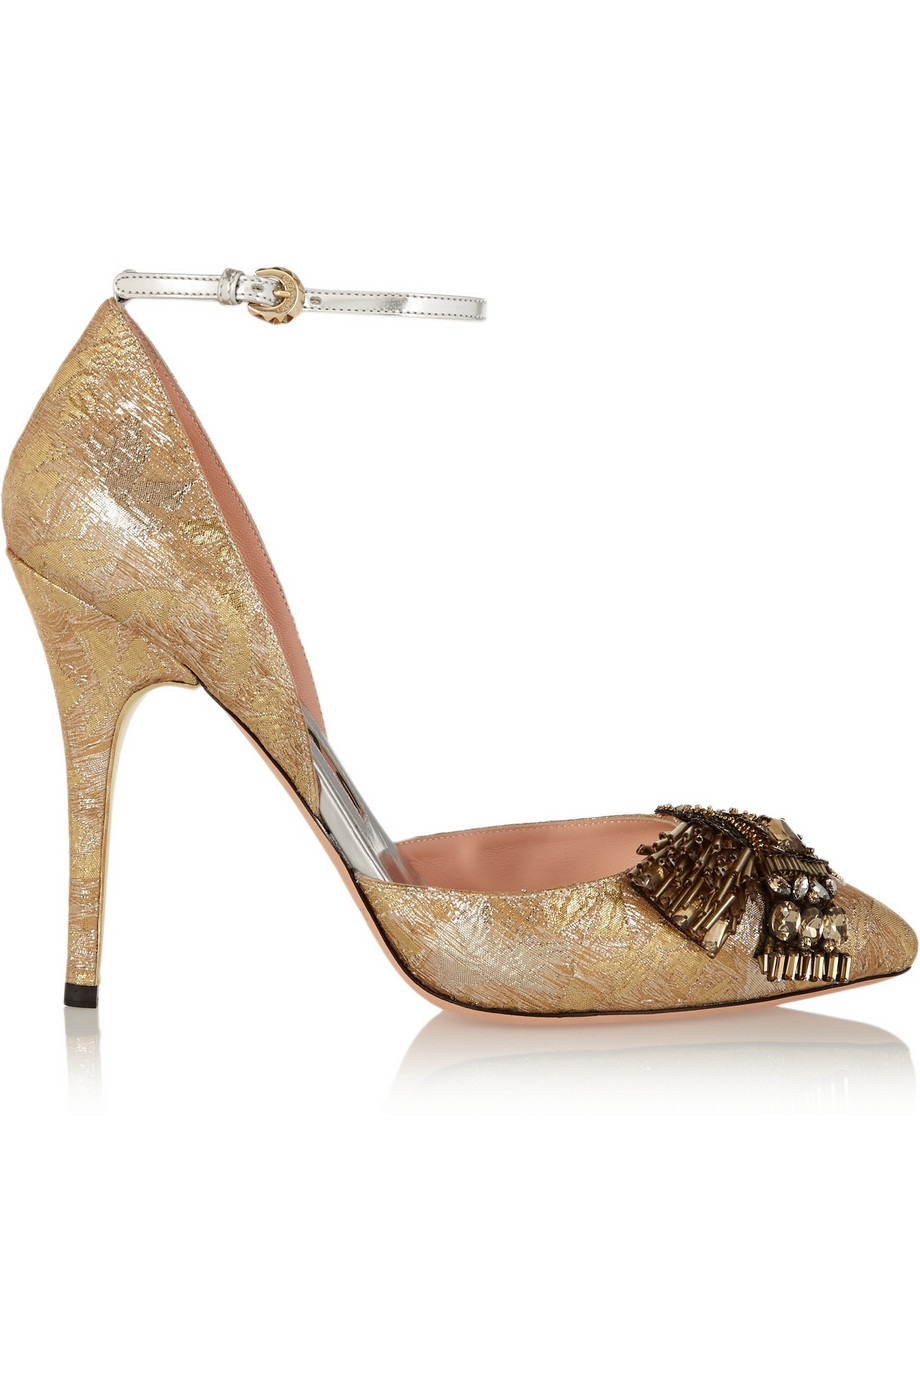   Rochas  pump - was $1,050, now $525 